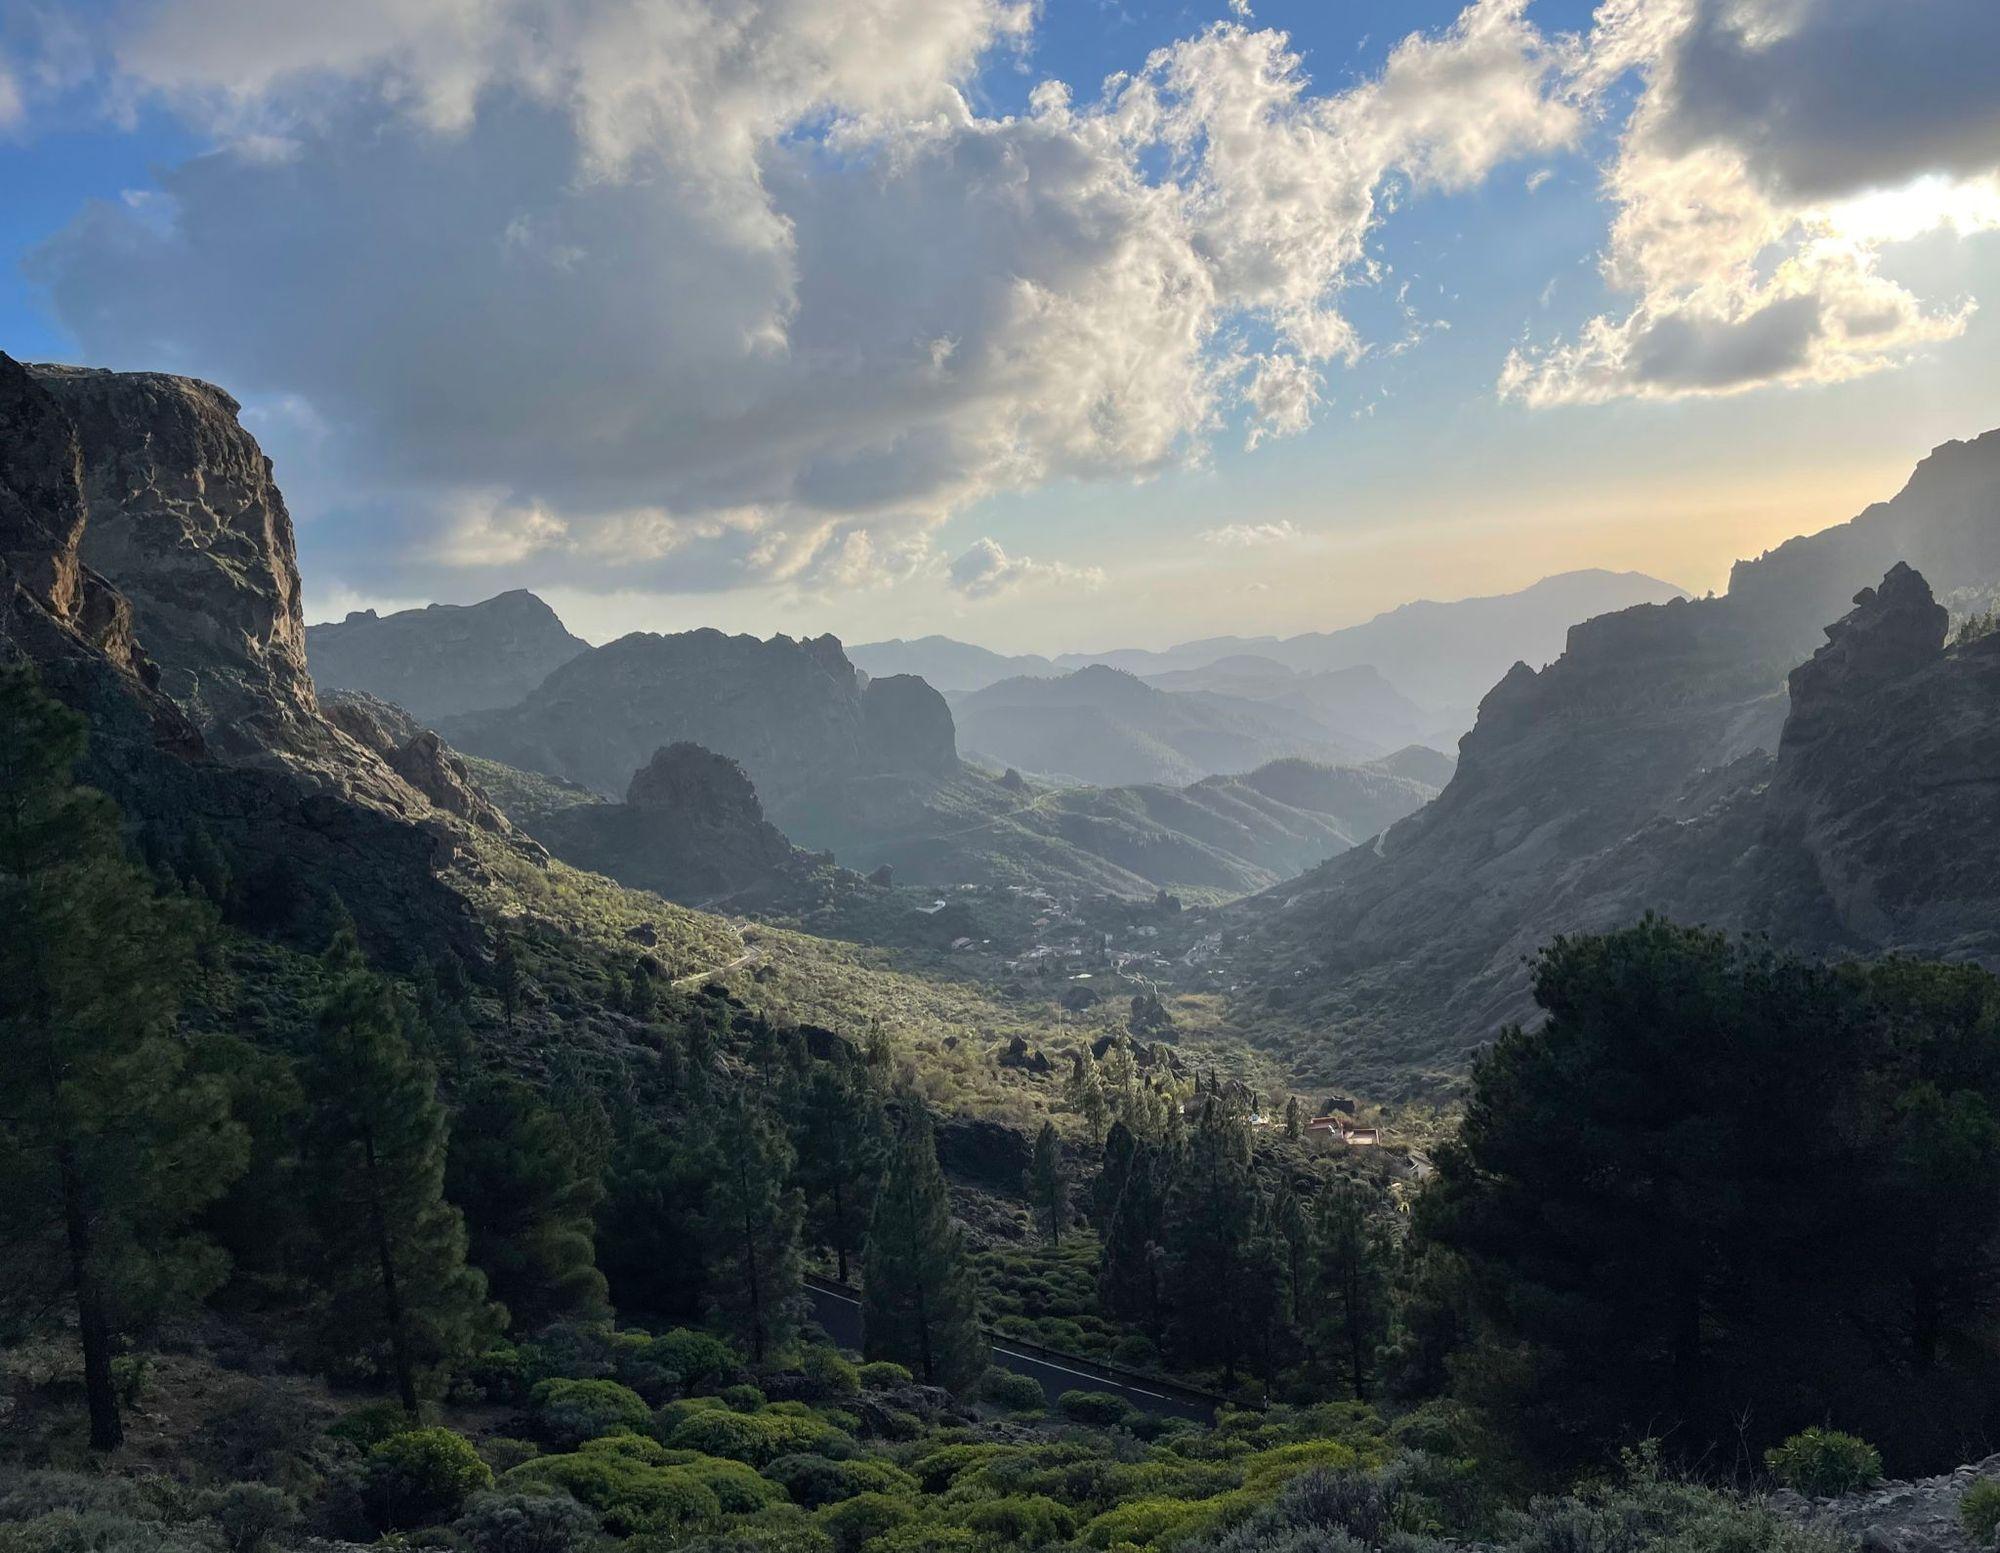 View from the “Roque Nublo” hike in Gran Canaria island